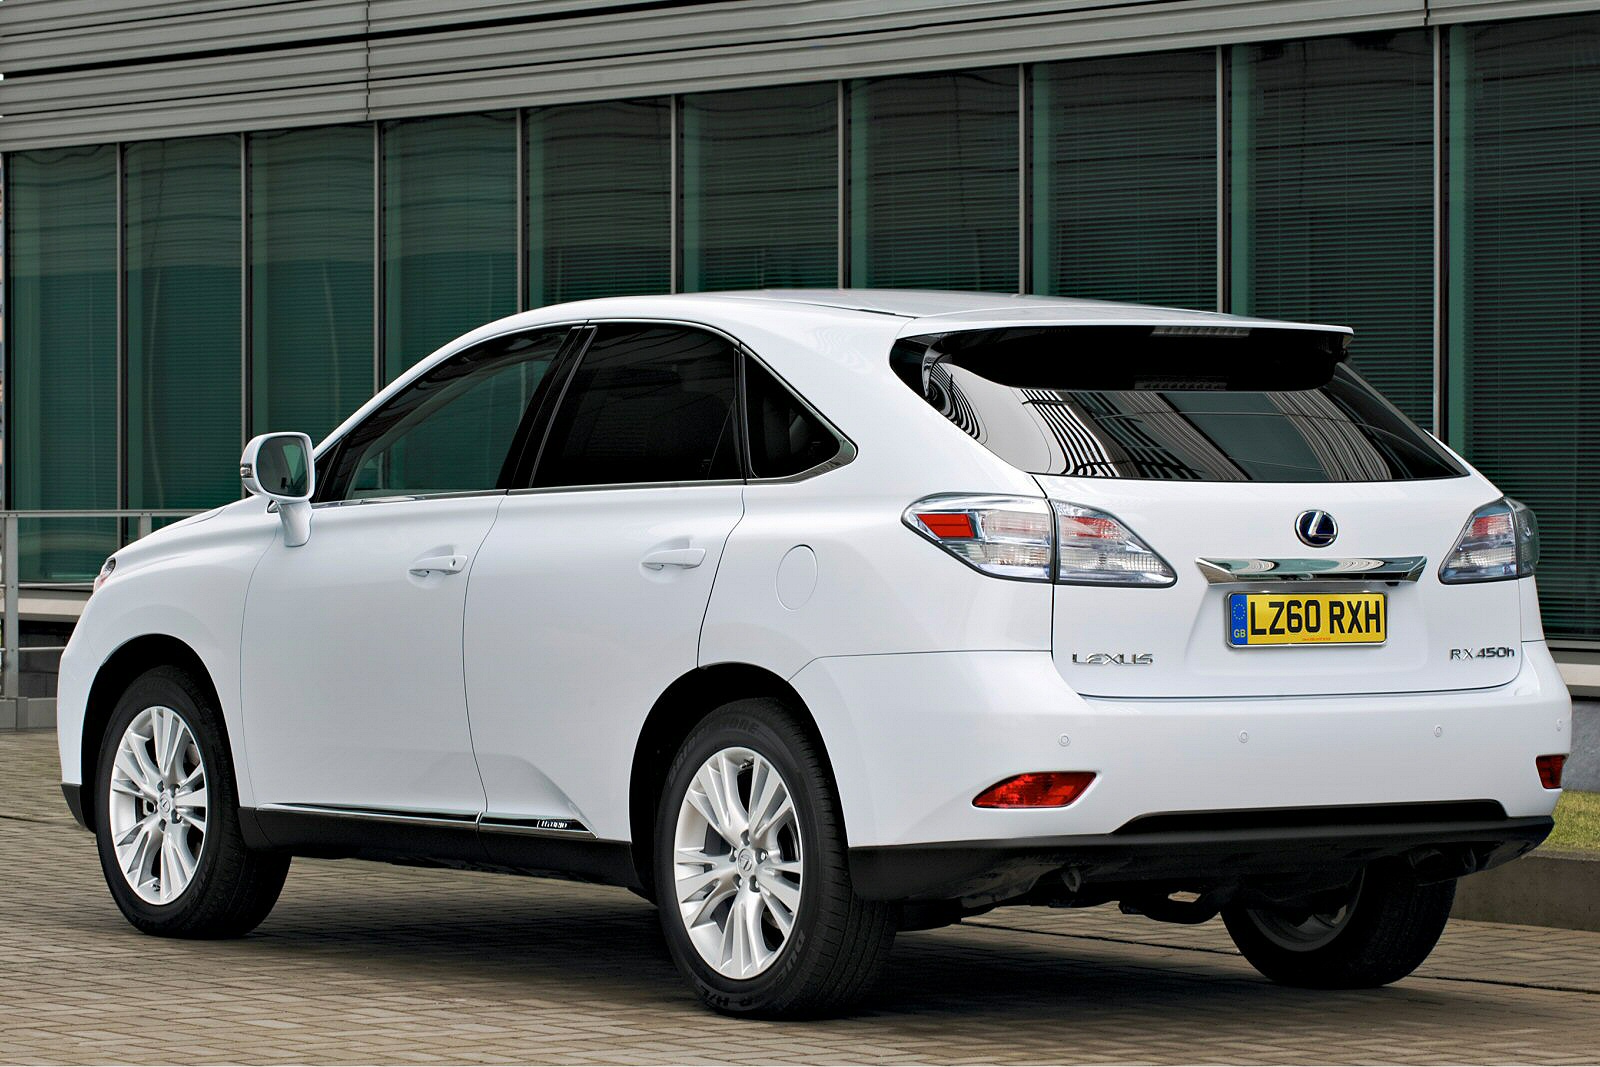 ‘MORE POWER TO YOU’ Lexus RX 450h (2009 2012) Range